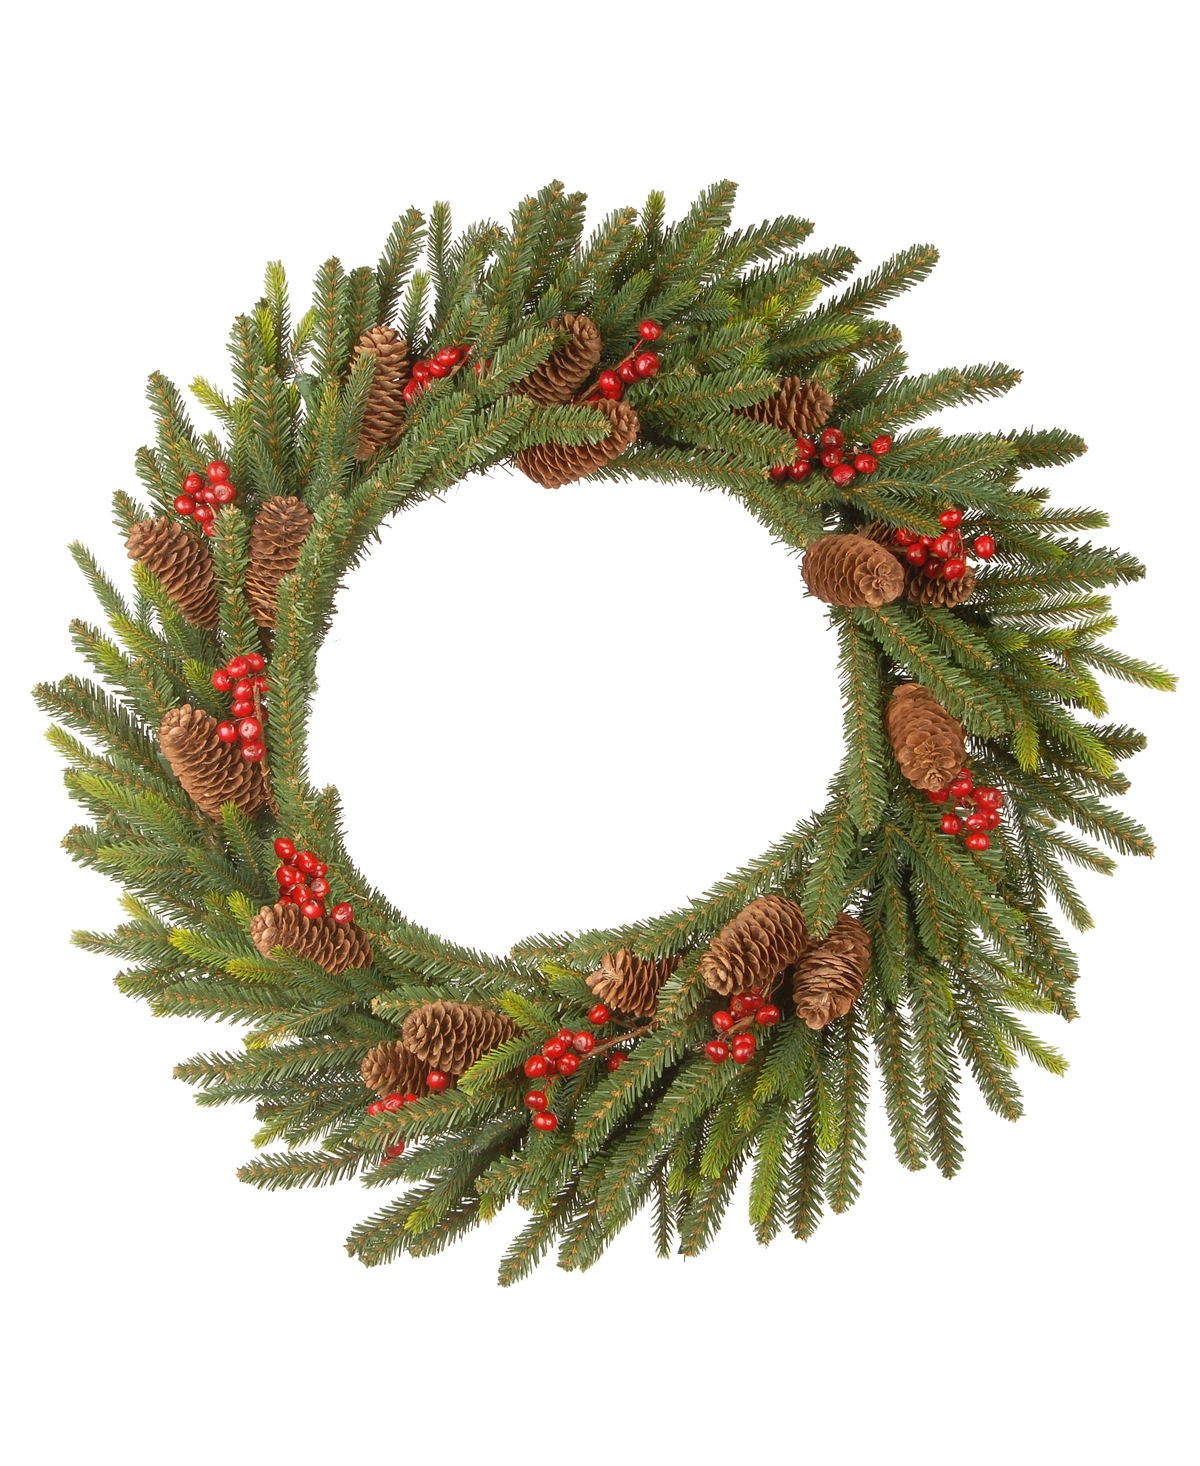 24in. Dorchester Fir Wreath with Battery Operated Led Lights - Green